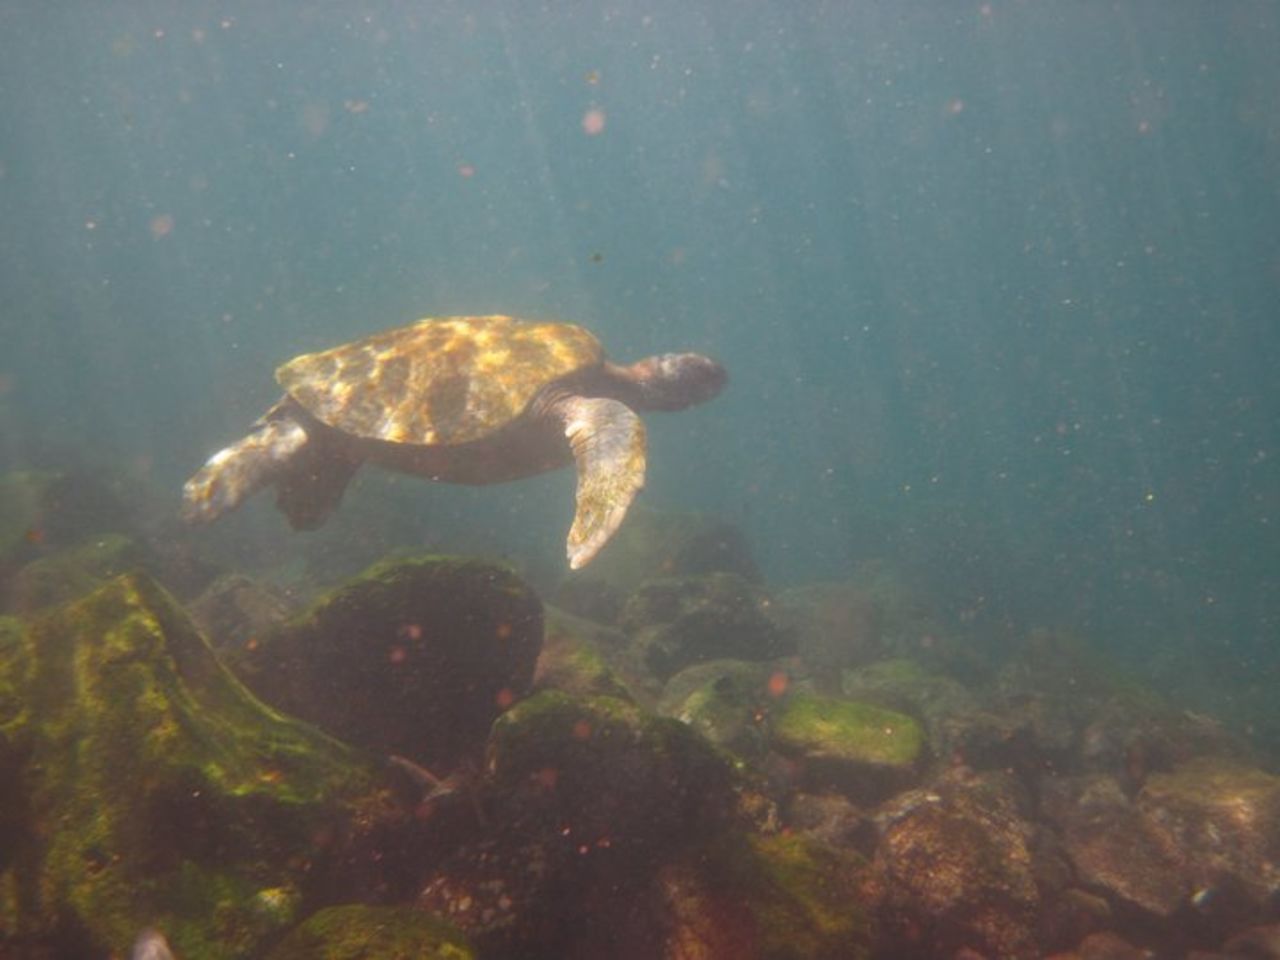 Sullivan shared several photos she took while underwater. Snorkeling and diving are popular activities on the islands, and you might get lucky and spot a turtle or two.